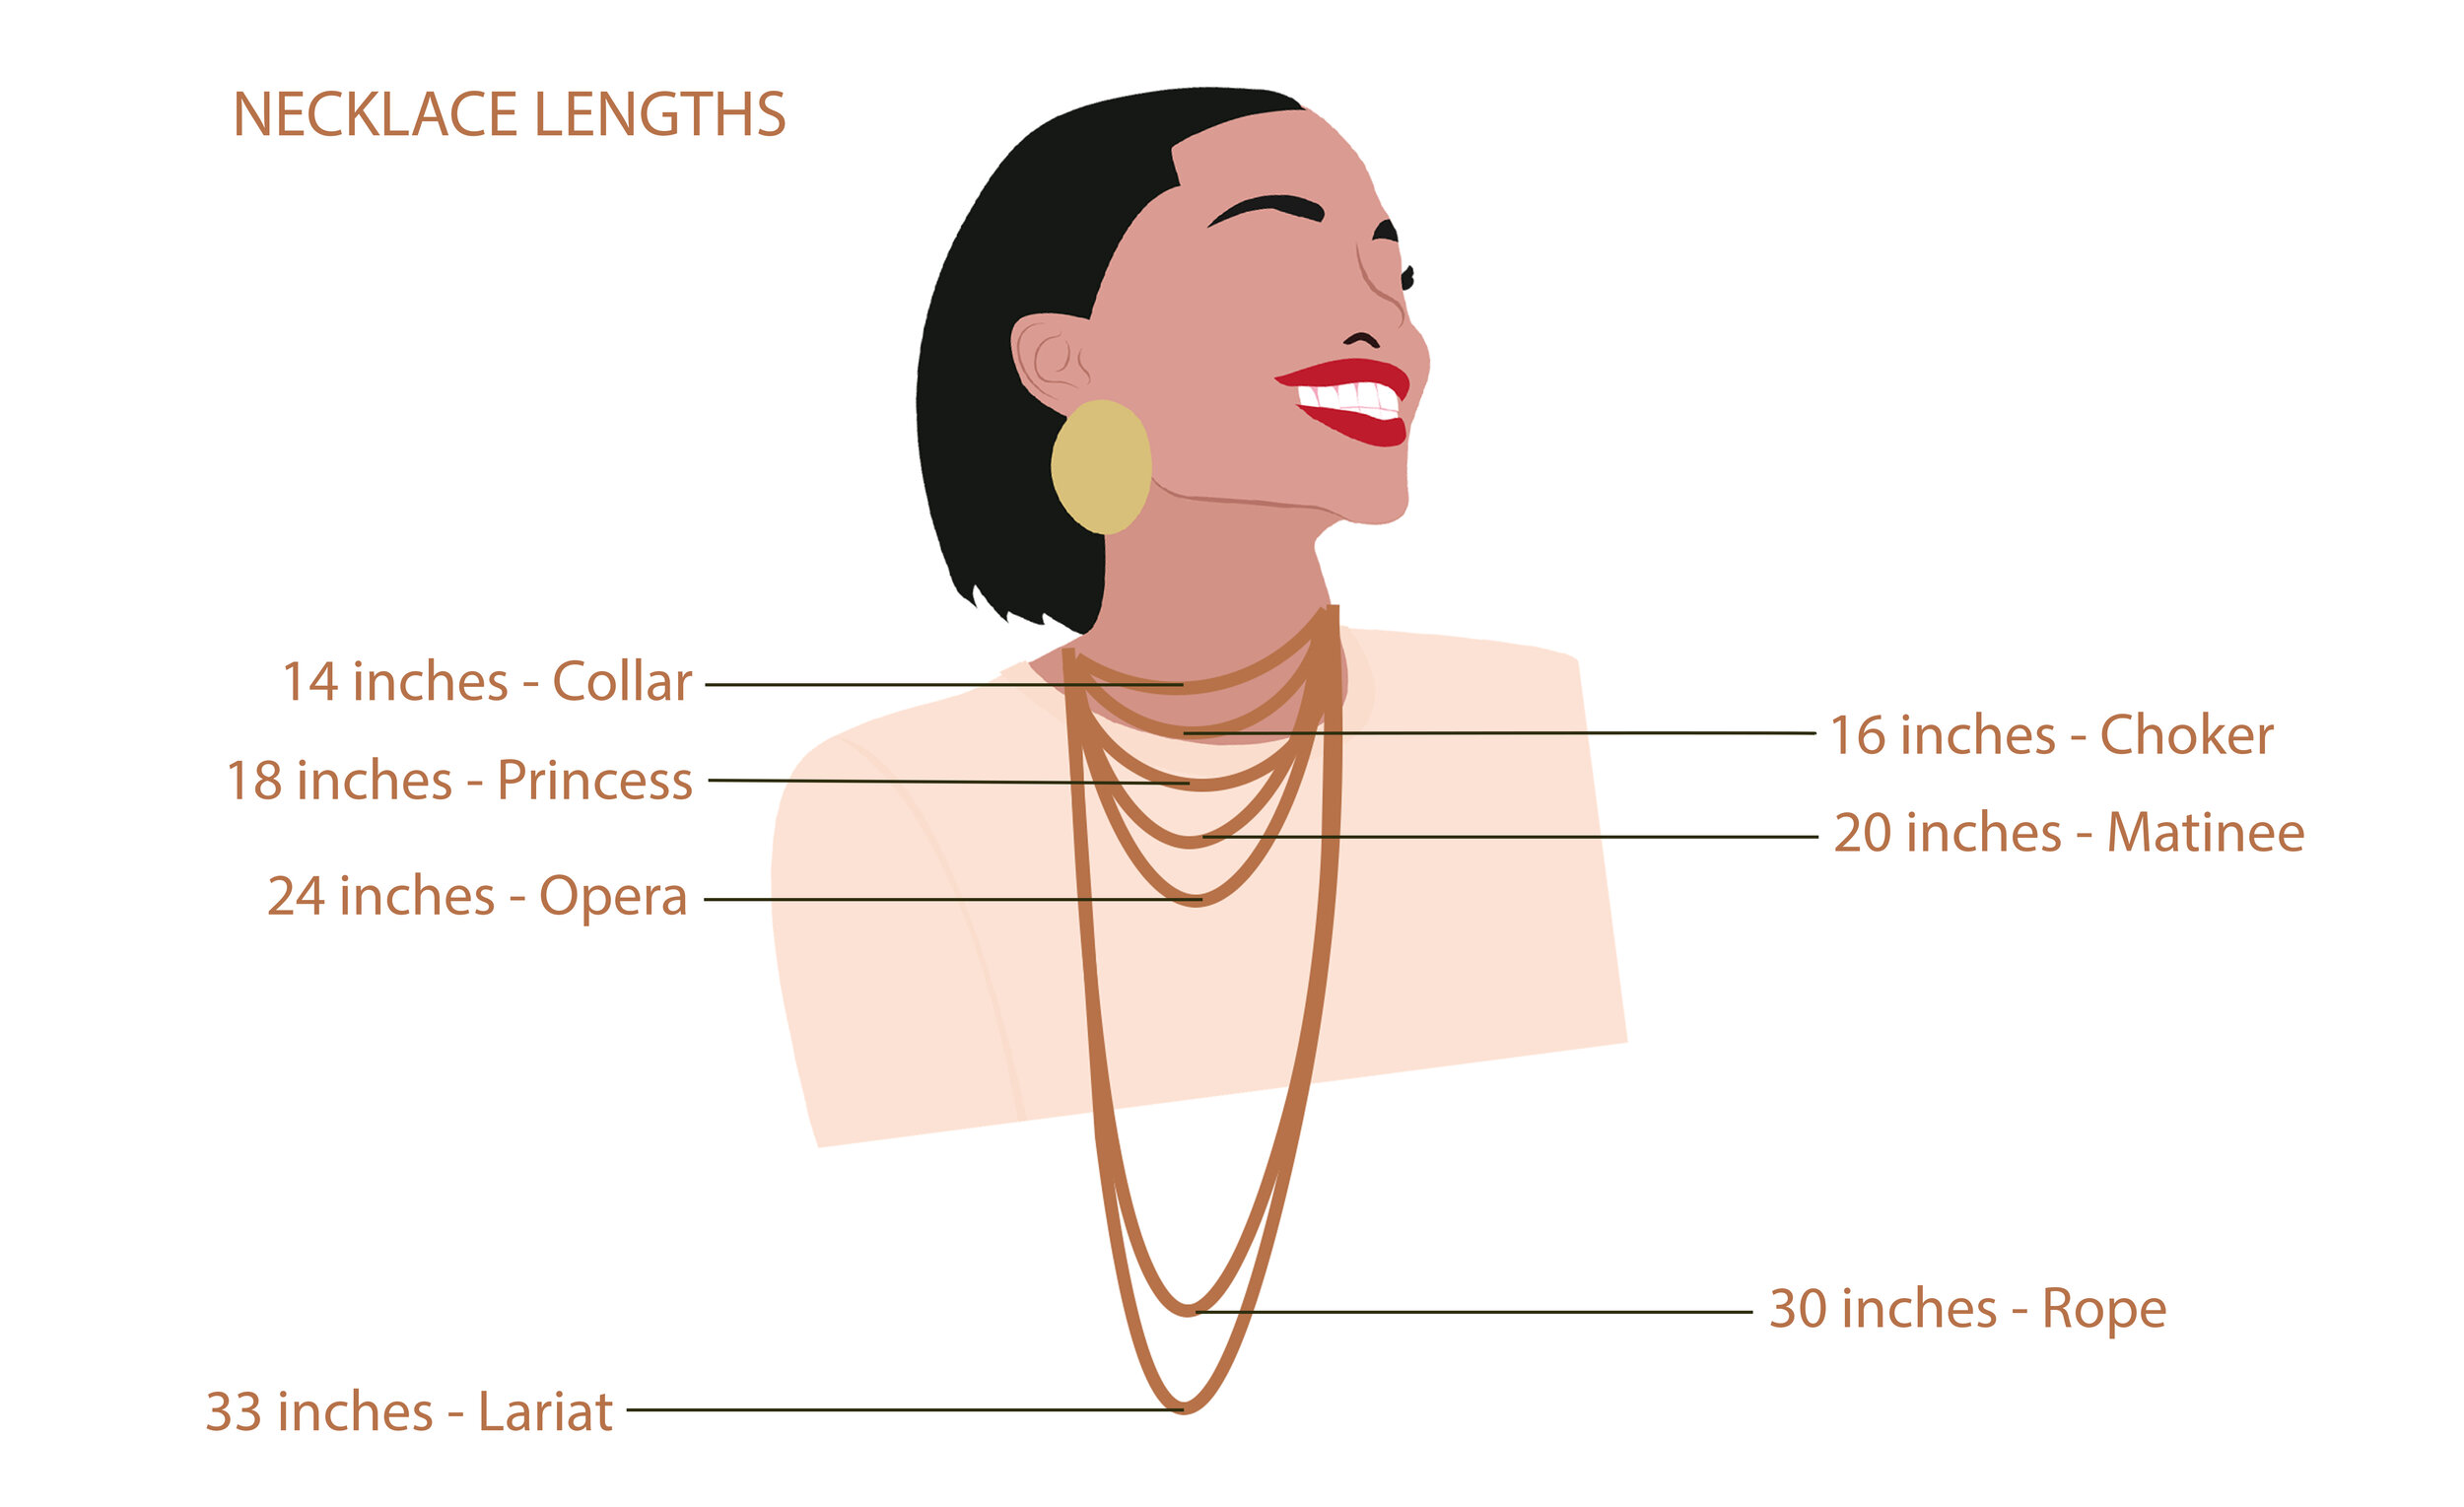 How to Choose the Right Necklace Length for You